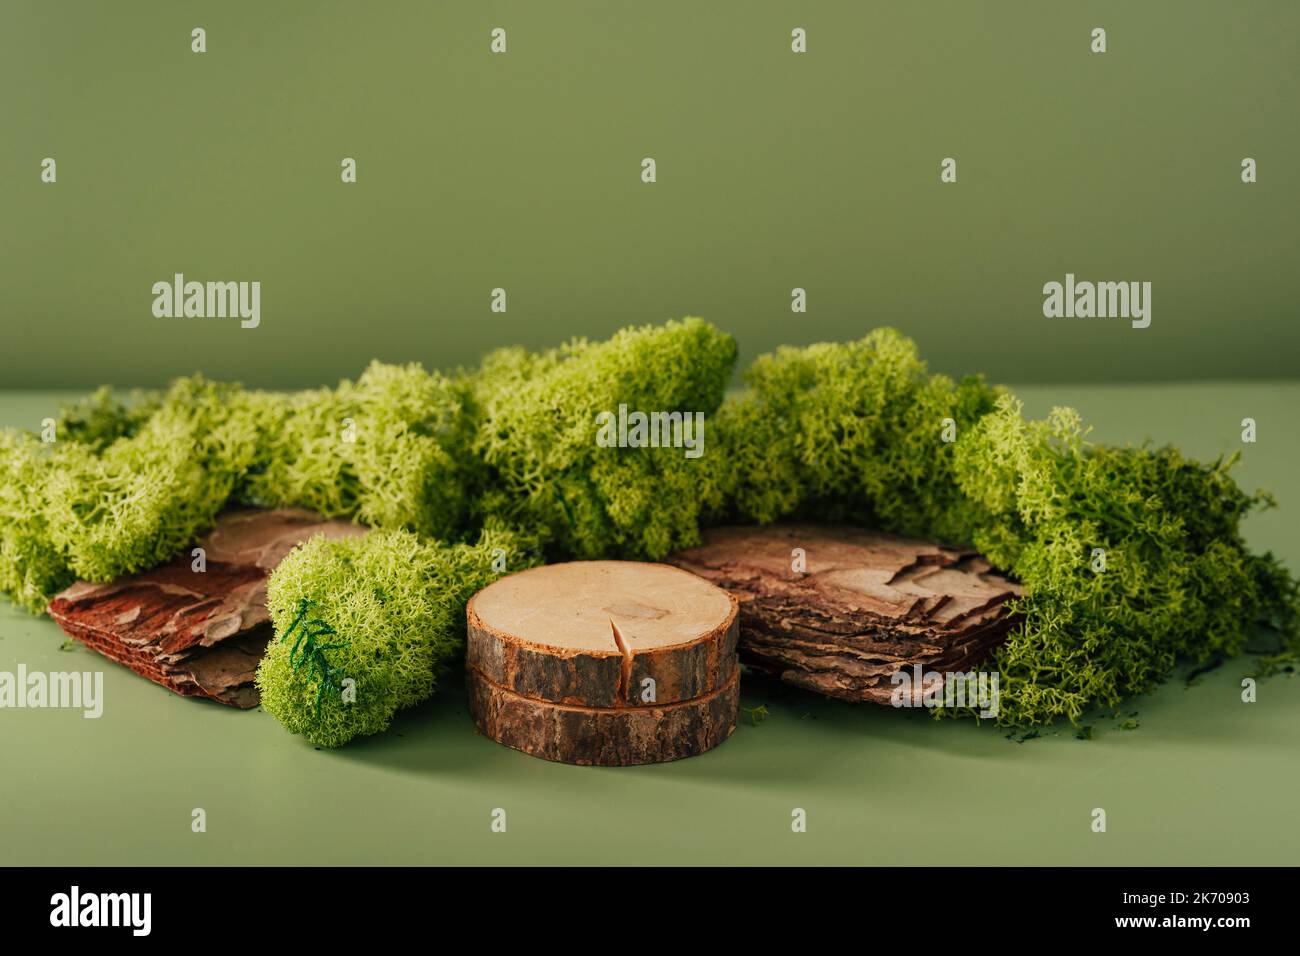 Composition of bark tree and moss on warm green background. Abstract podium for organic cosmetic products. Natural stand for presentation and exhibitions. Minimal design Stock Photo